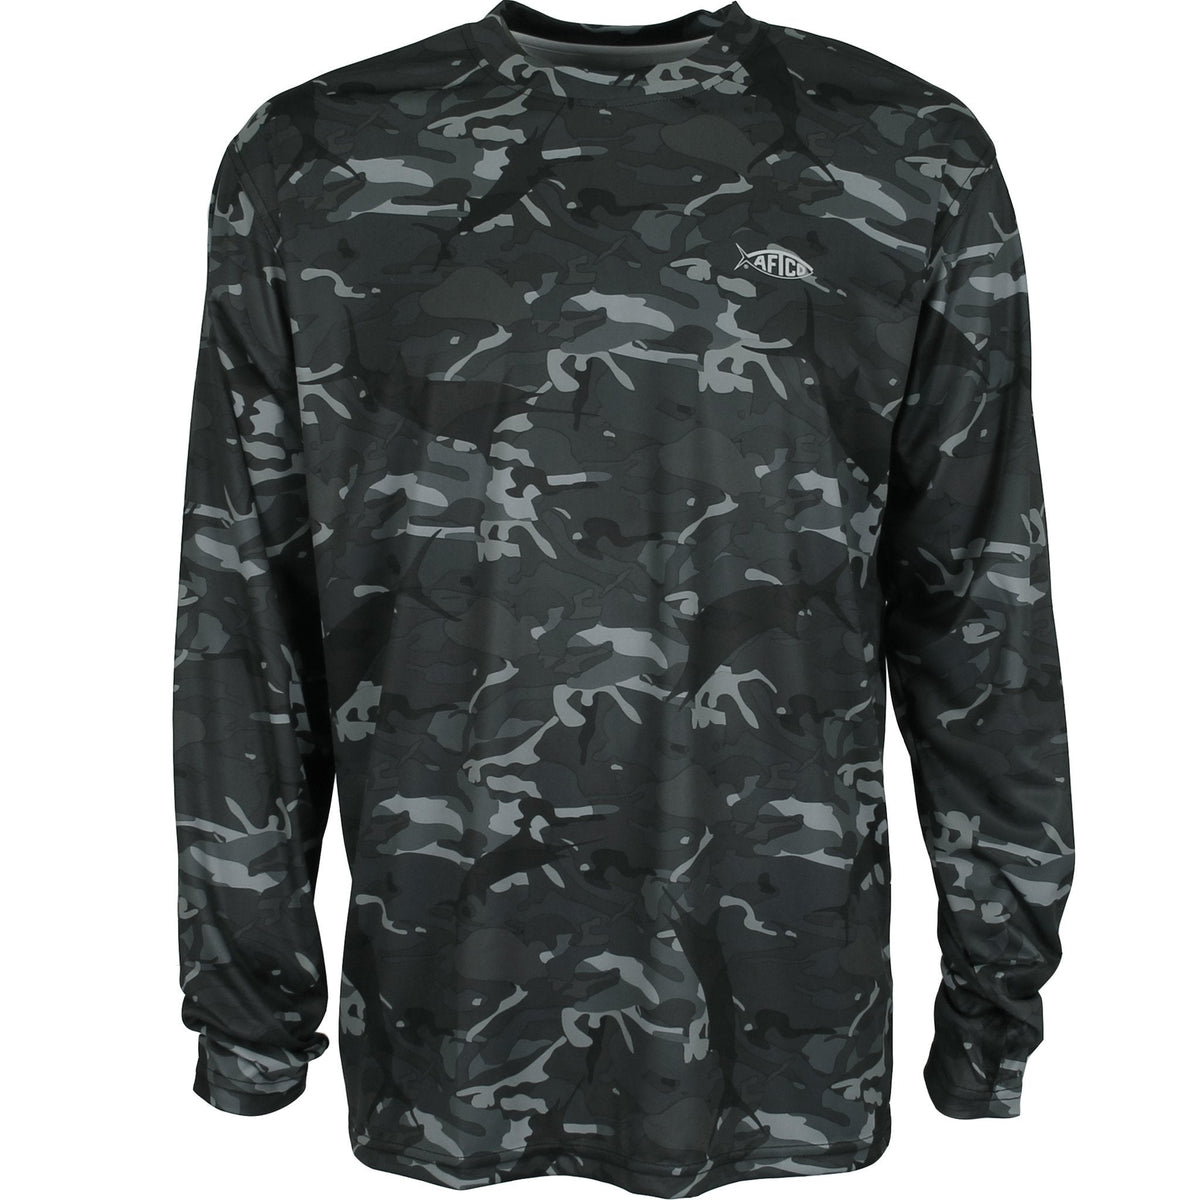 AFTCO Caster Long Sleeve Sun Shirt from AFTCO - CHAOS Fishing